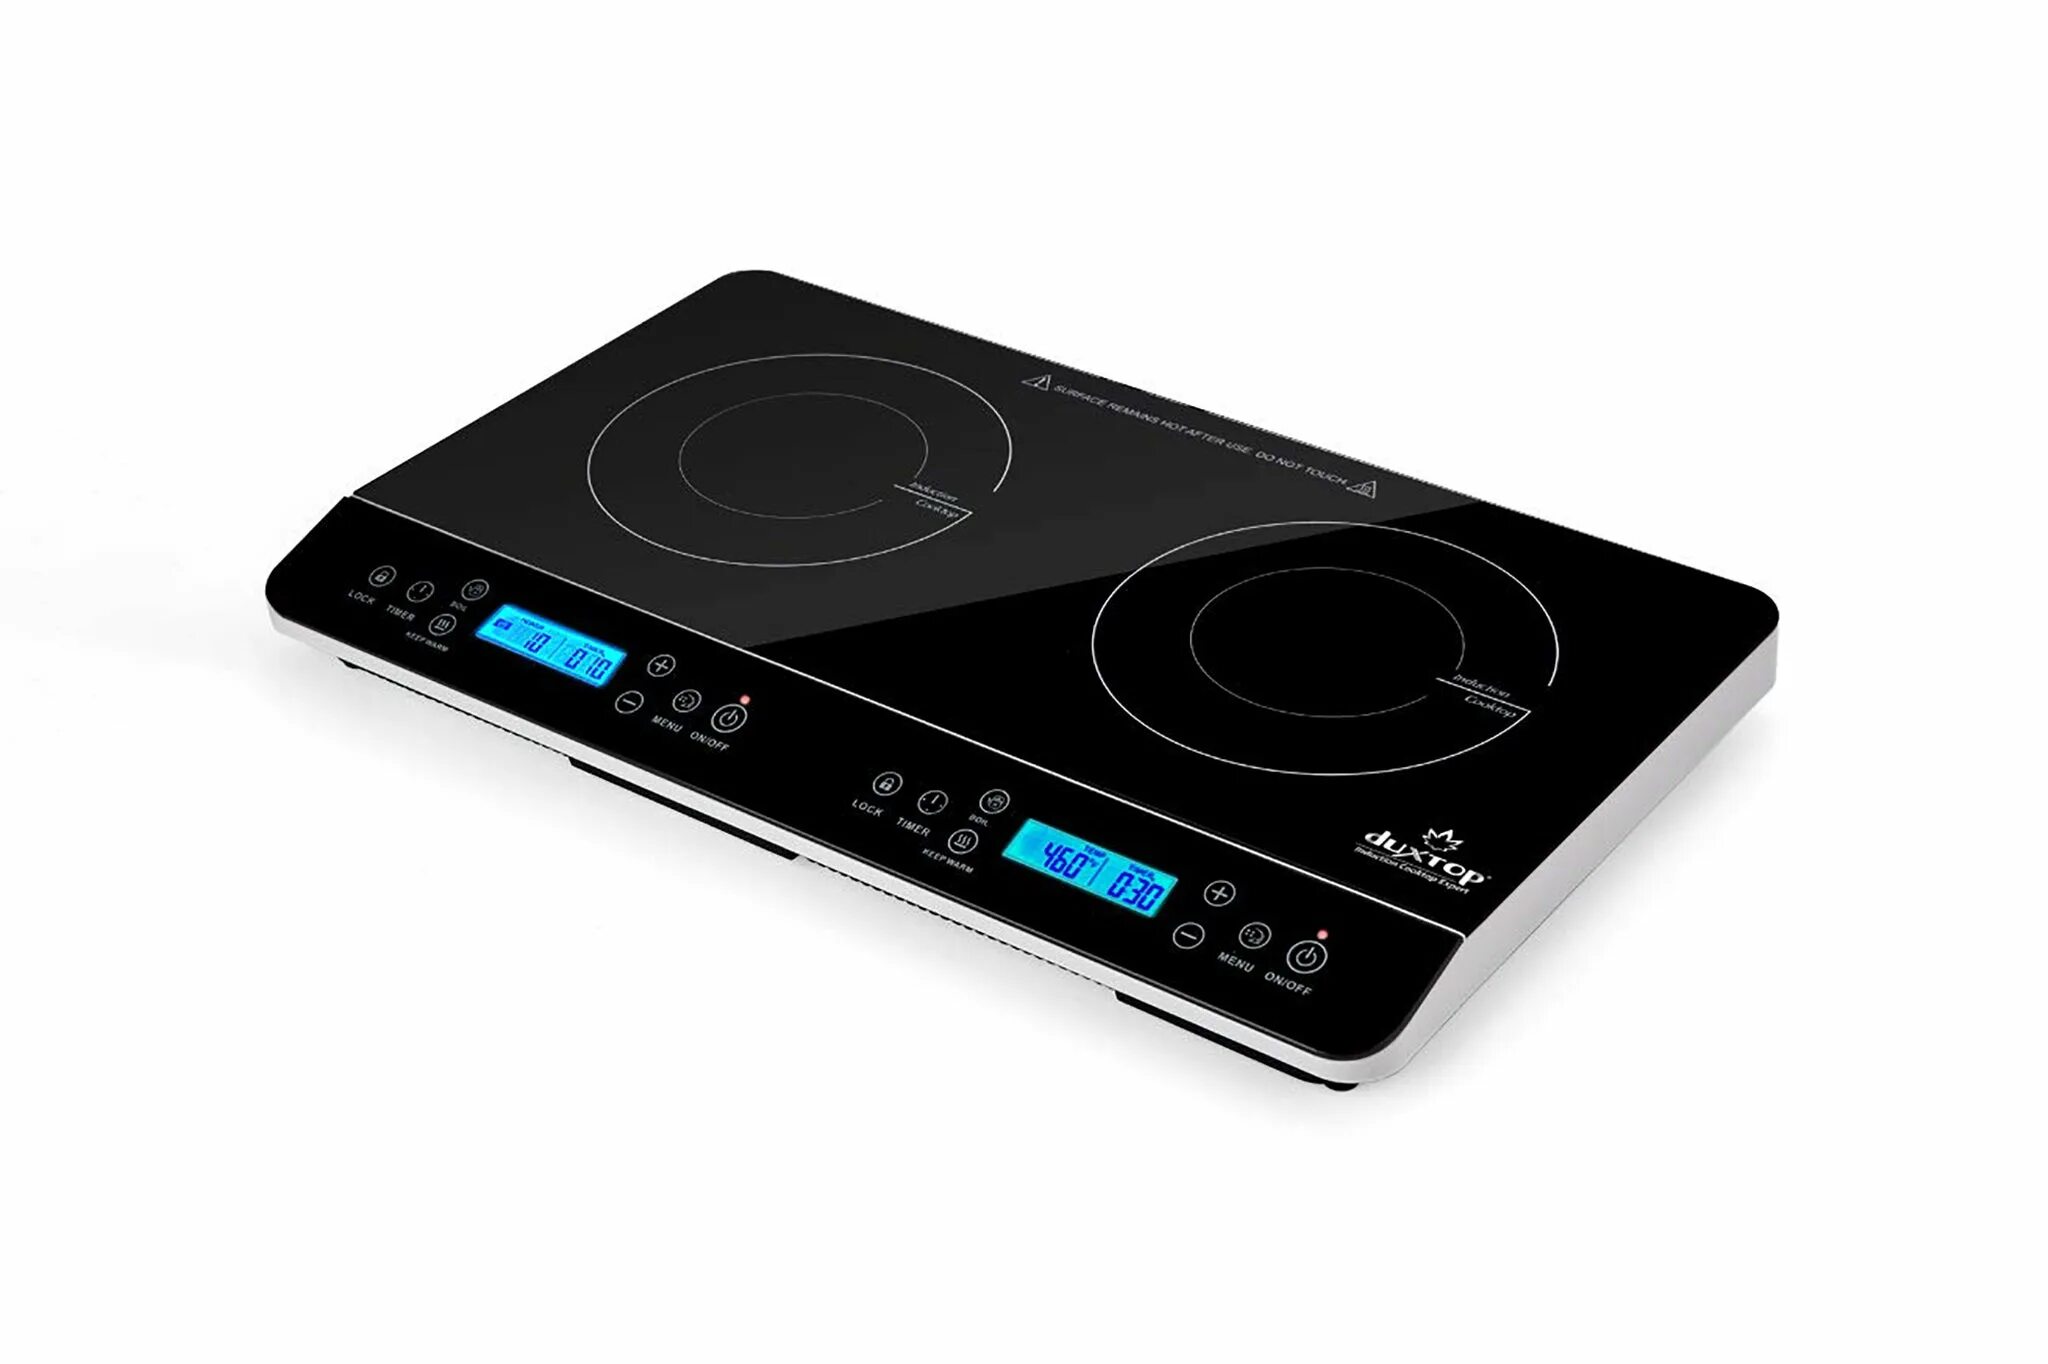 Greystone Induction Cooker - Double Burner. Induction Cooker Double. Portable Induction range. Valberg Induction Cooker.